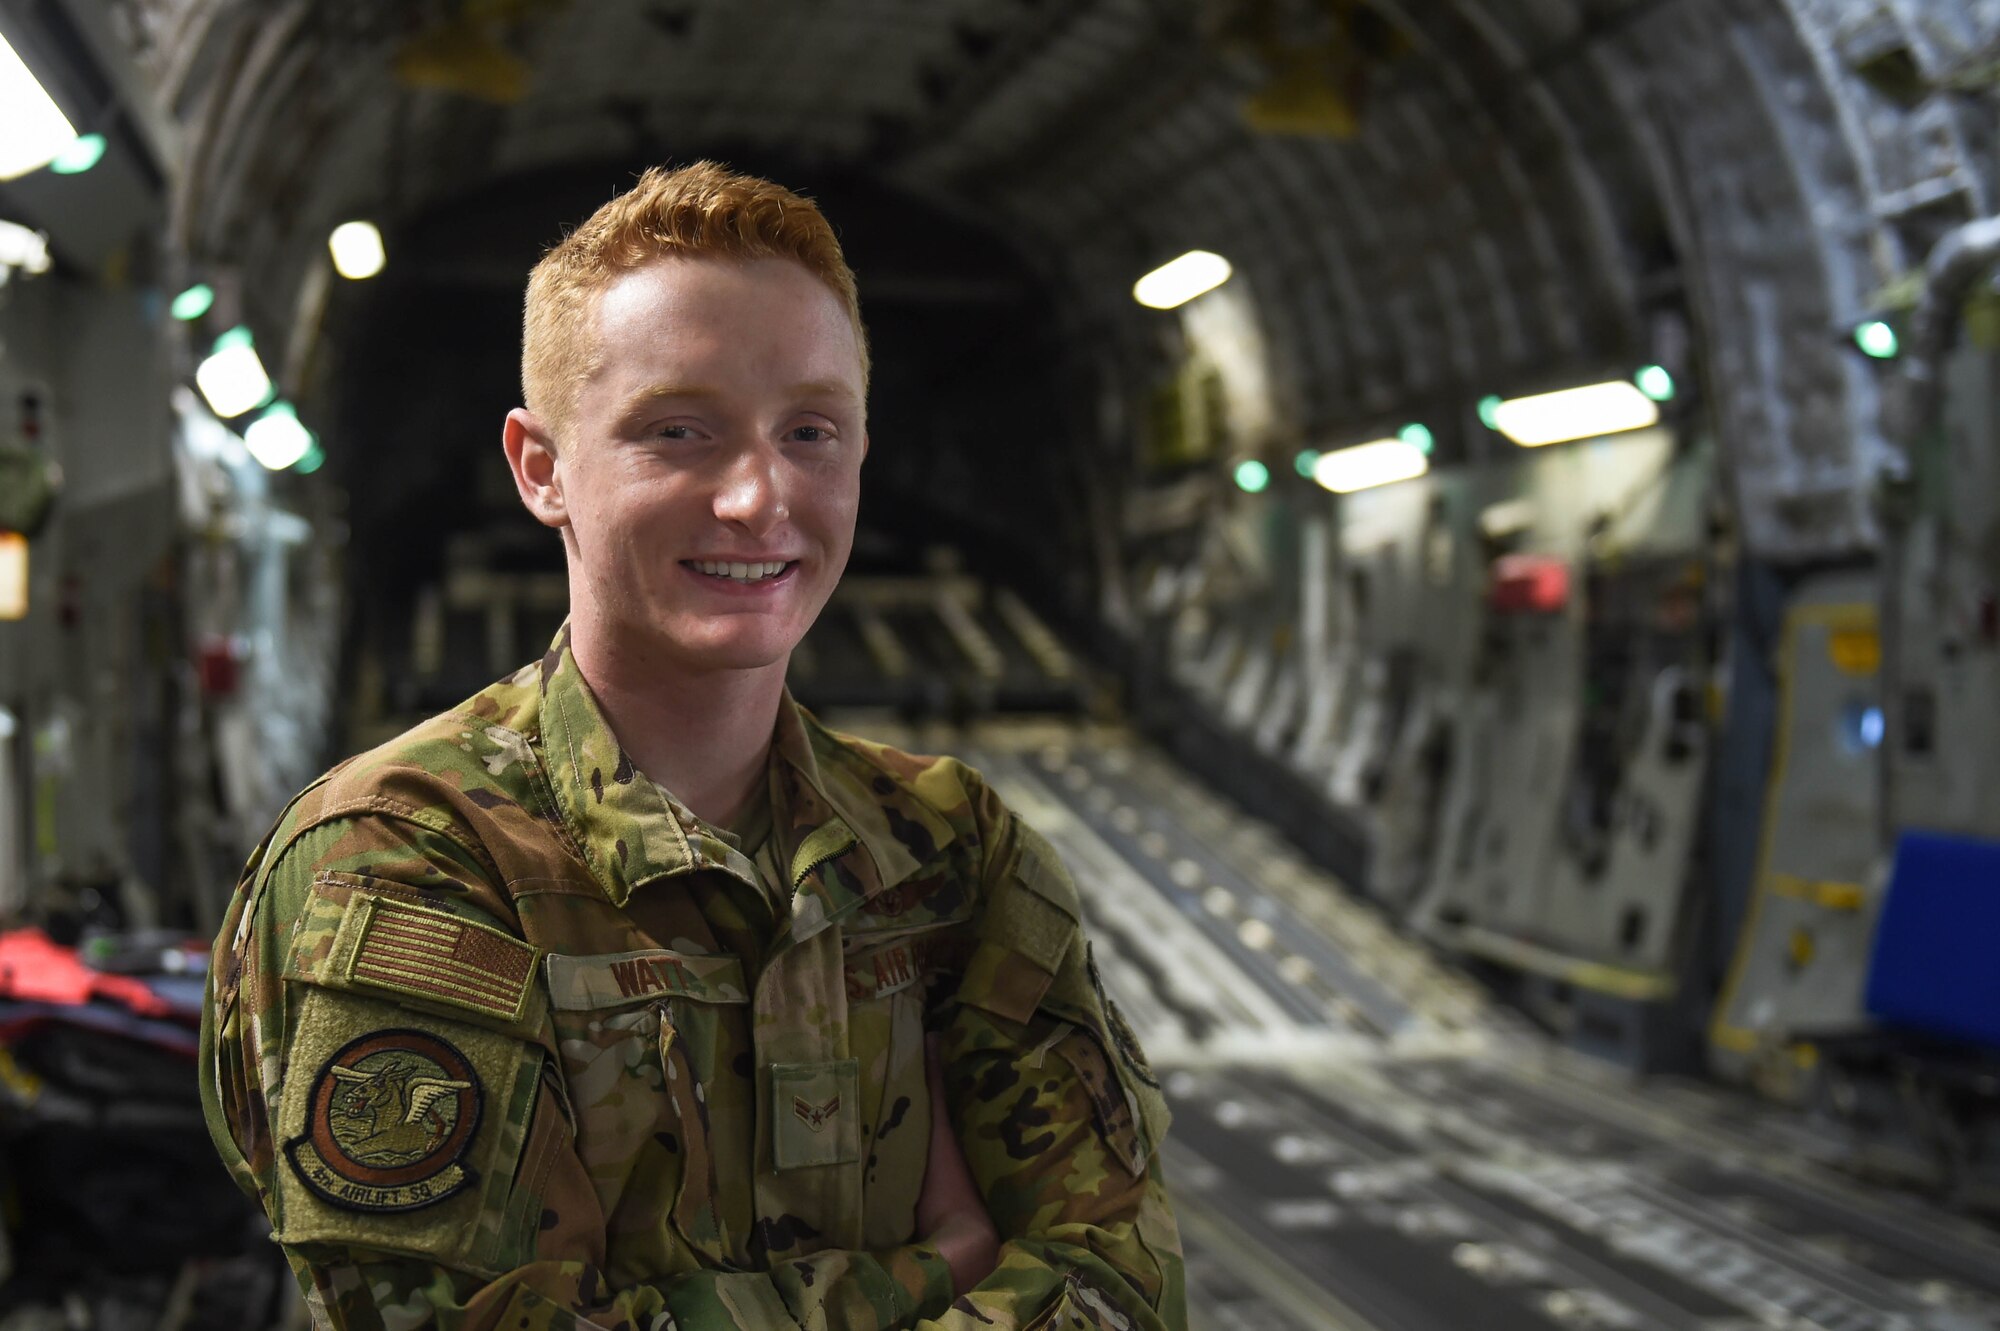 Airman 1st Class Kam Watt, 4th Airlift Squadron loadmaster, poses for a photo inside a C-17 Globemaster III before taking off from Ramstein Air Base, Germany, Dec. 22, 2019. After a seven-day mission, Watt and the rest of the aircrew were headed back to Joint Base Lewis-McChord, Wash. (U.S. Air Force photo by Airman 1st Class Mikayla Heineck)